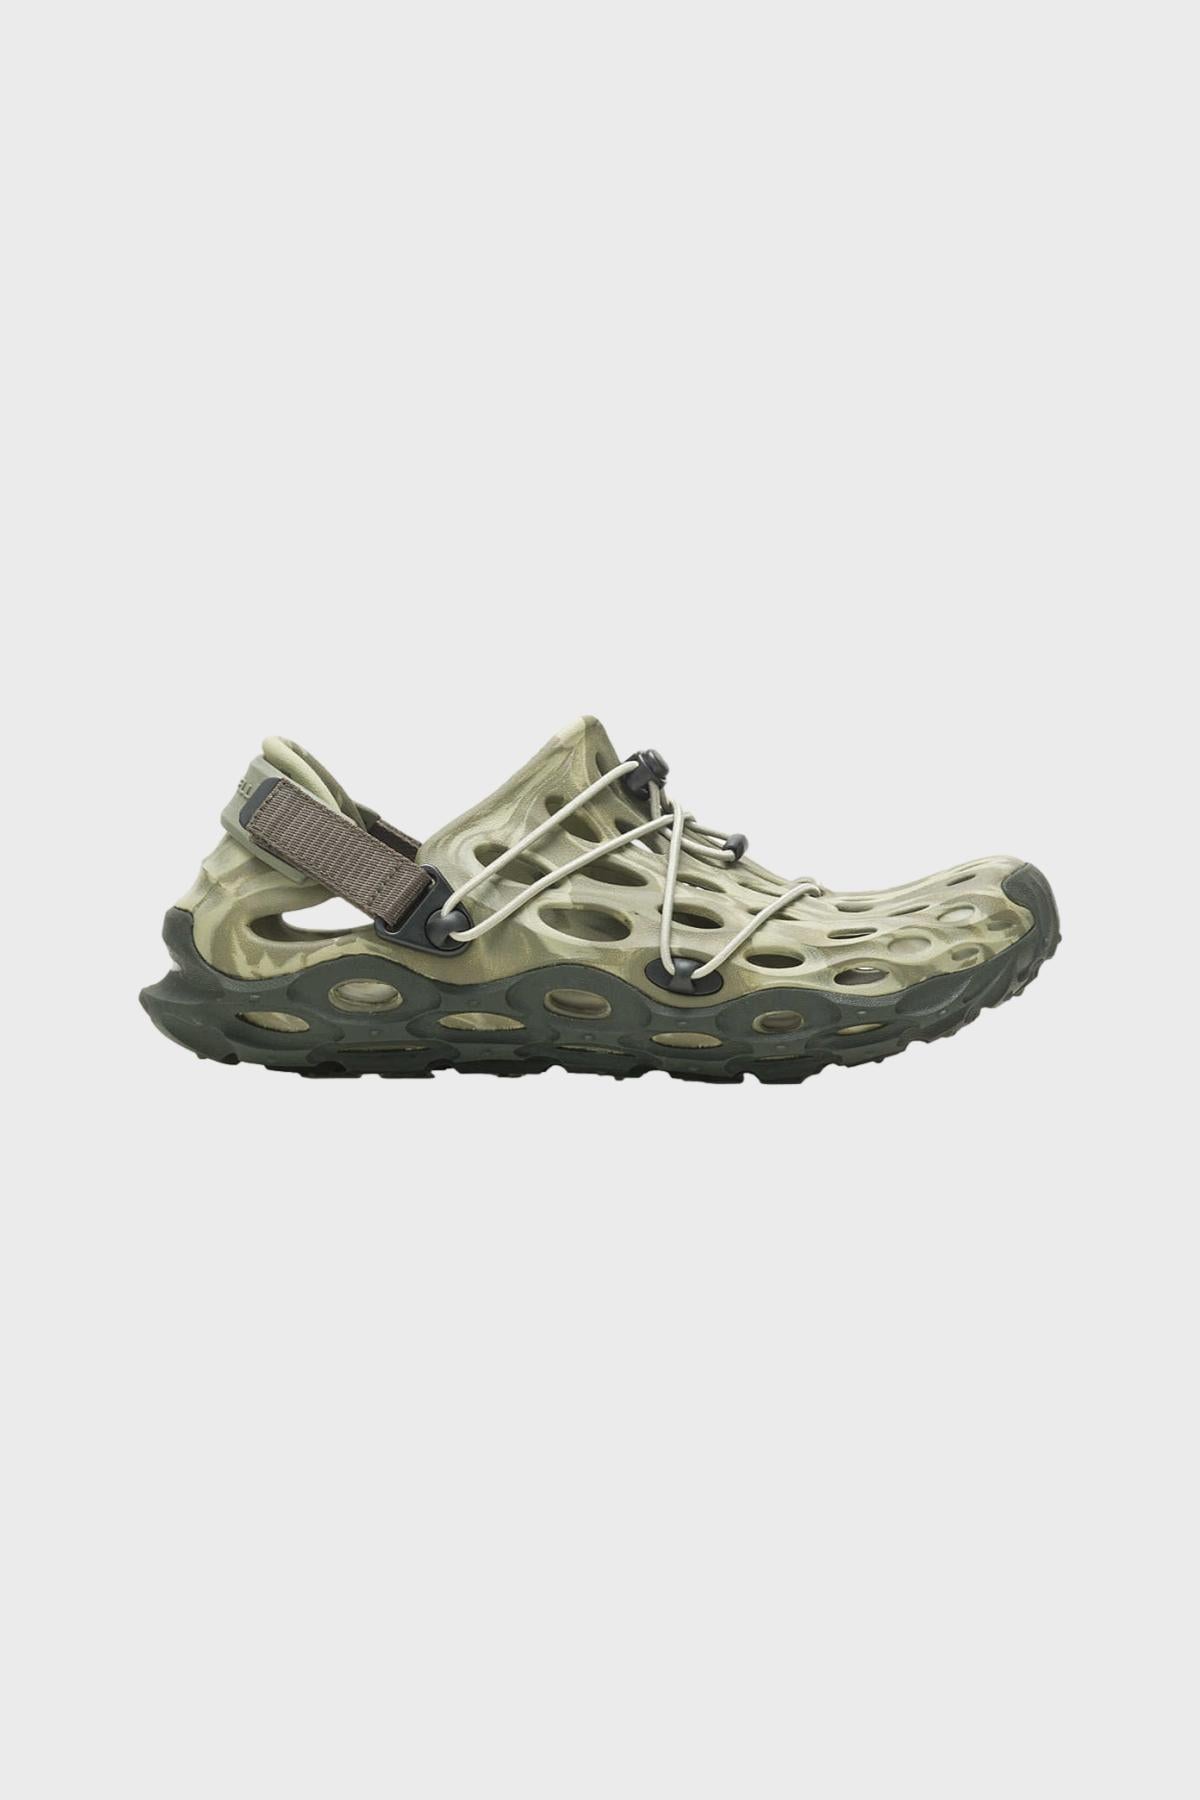 Merrell 1TRL - Hydro Moc AT Cage